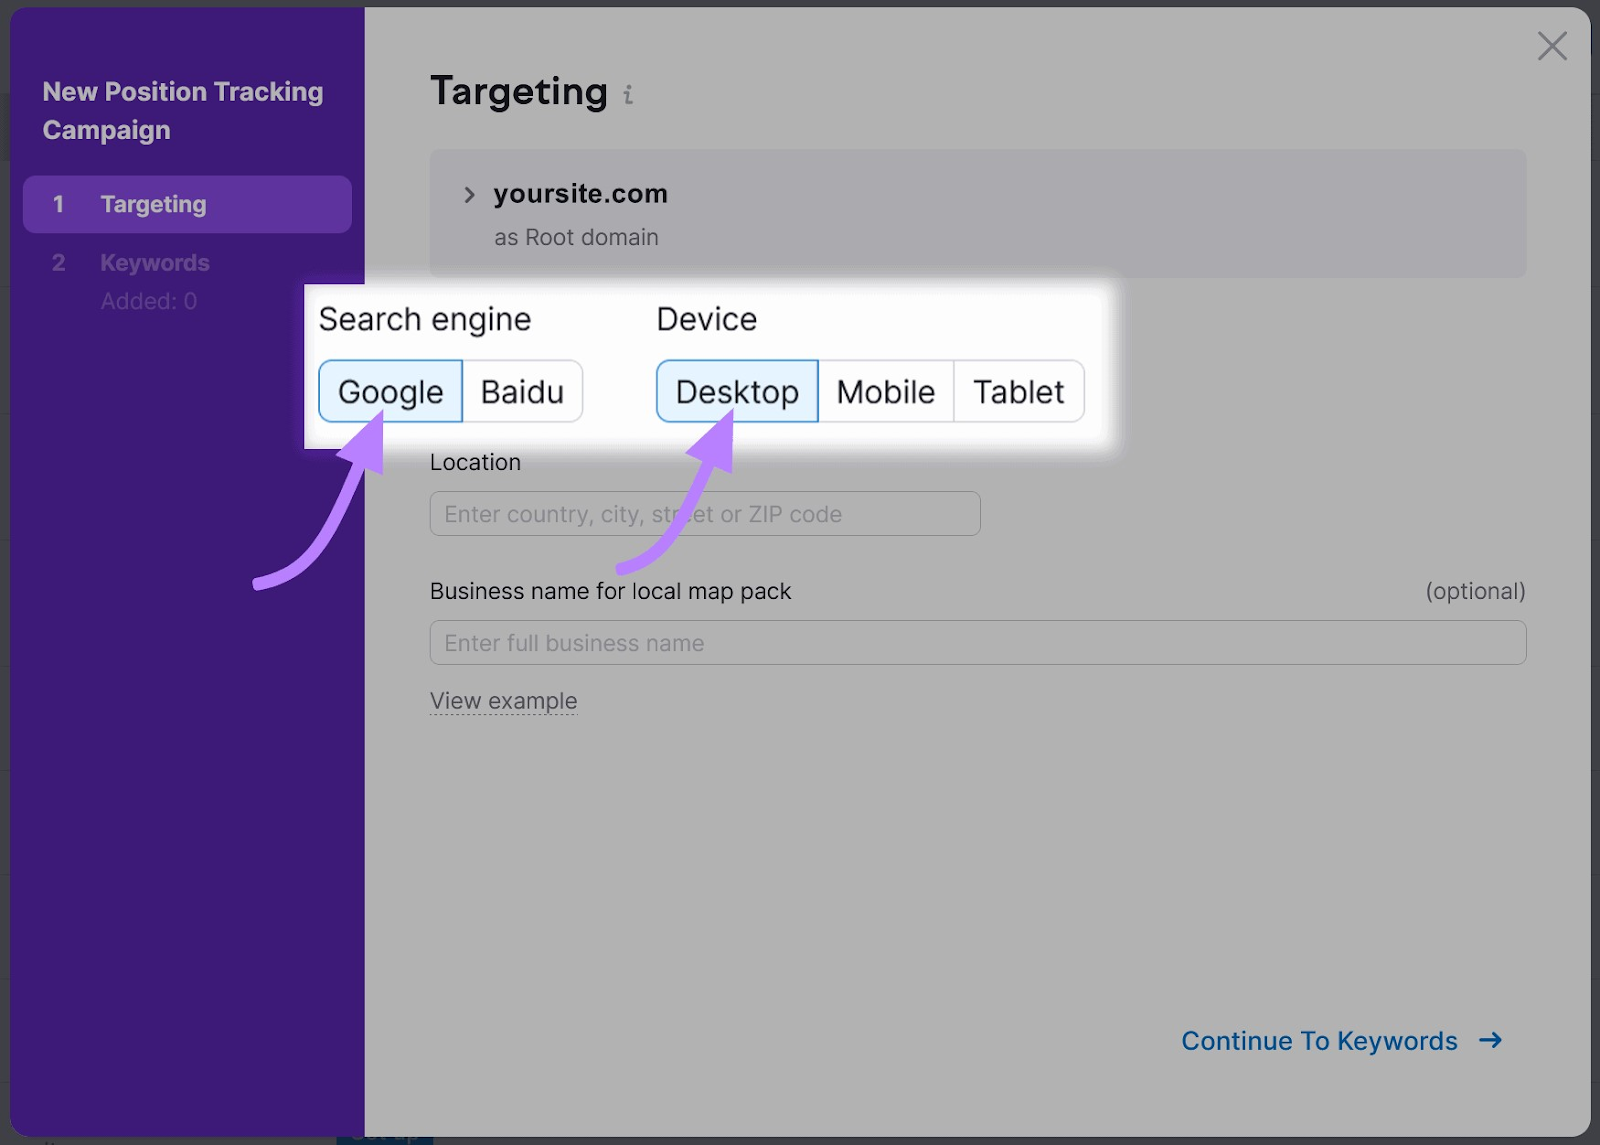 "Google" and "Desktop" options selected from the "Targeting" window in Position Tracking